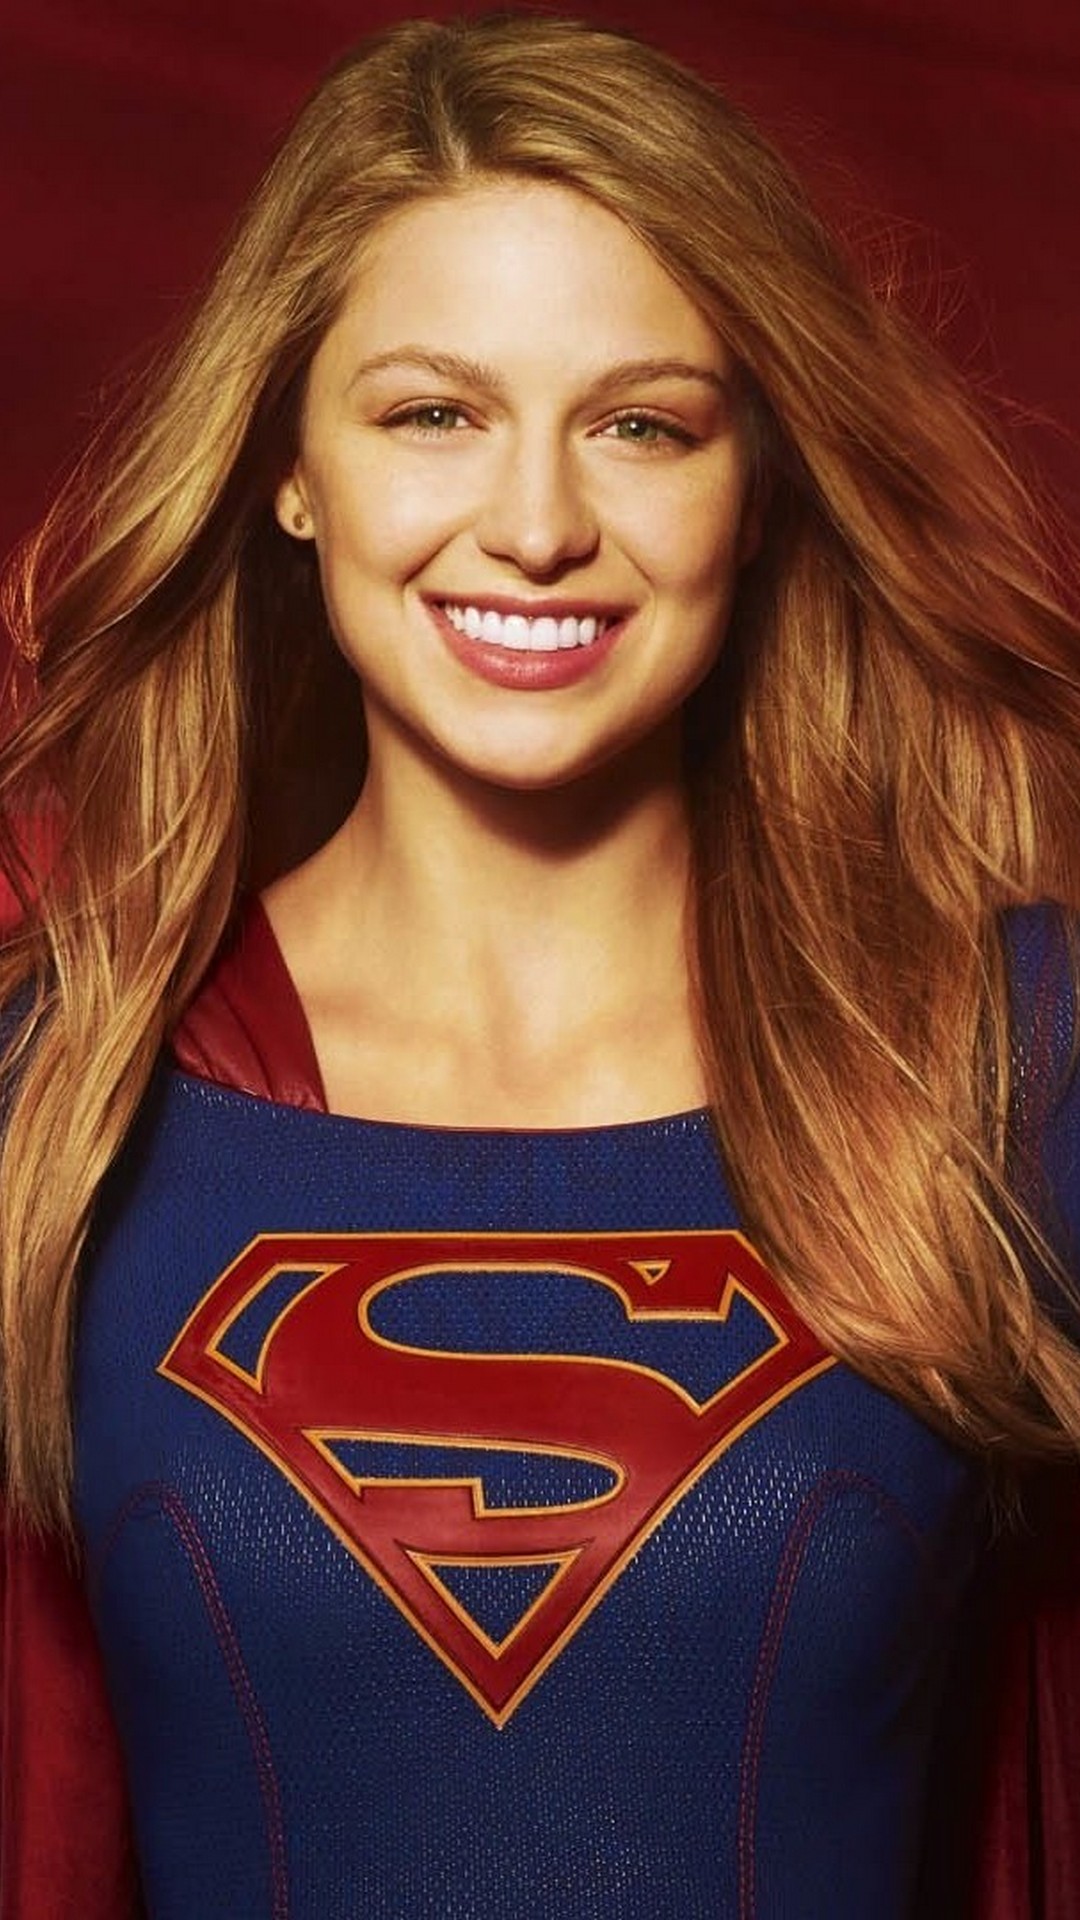 Supergirl Phone 8 Wallpaper with high-resolution 1080x1920 pixel. Download all Mobile Wallpapers and Use them as wallpapers for your iPhone, Tablet, iPad, Android and other mobile devices